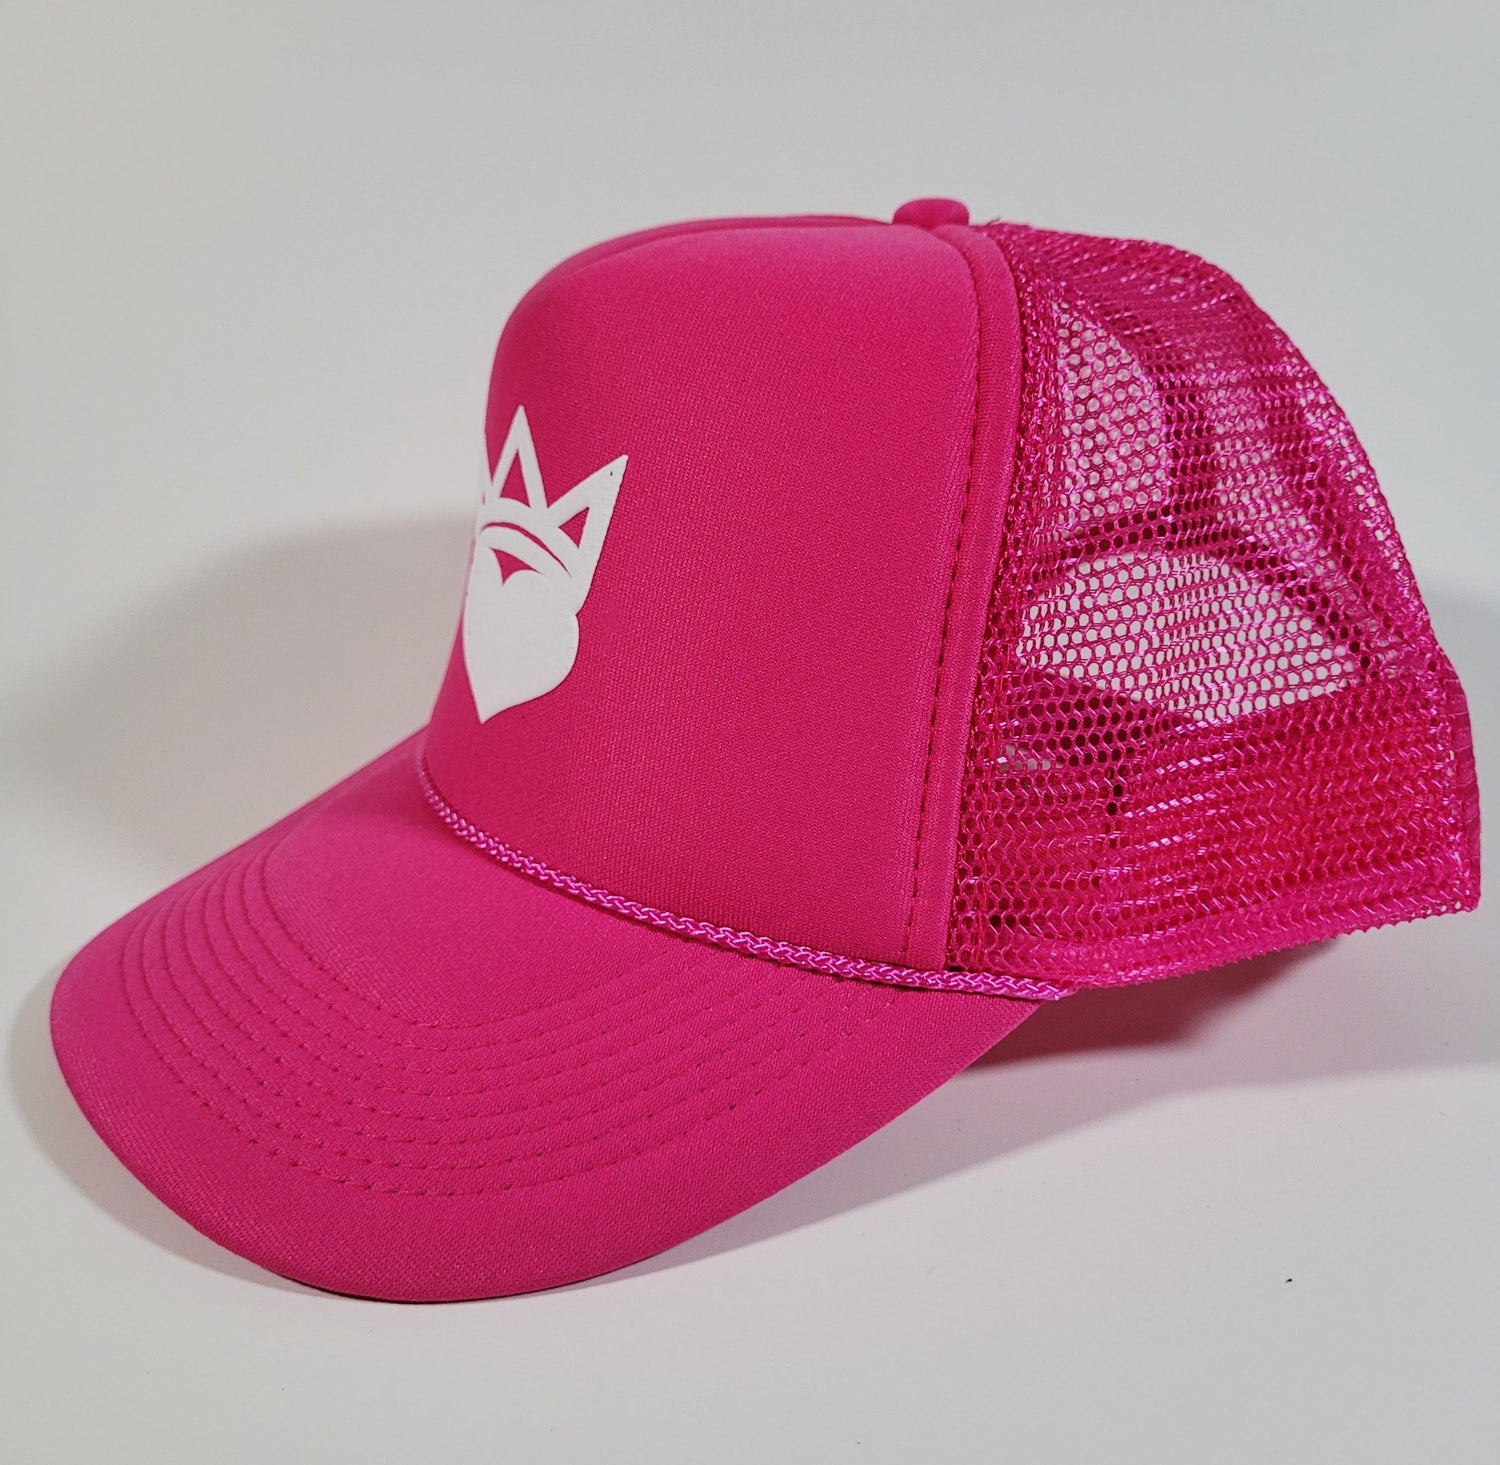 Dark Pink & White "King/Queen Of Hearts" Trucker Hat - Official Crown Store